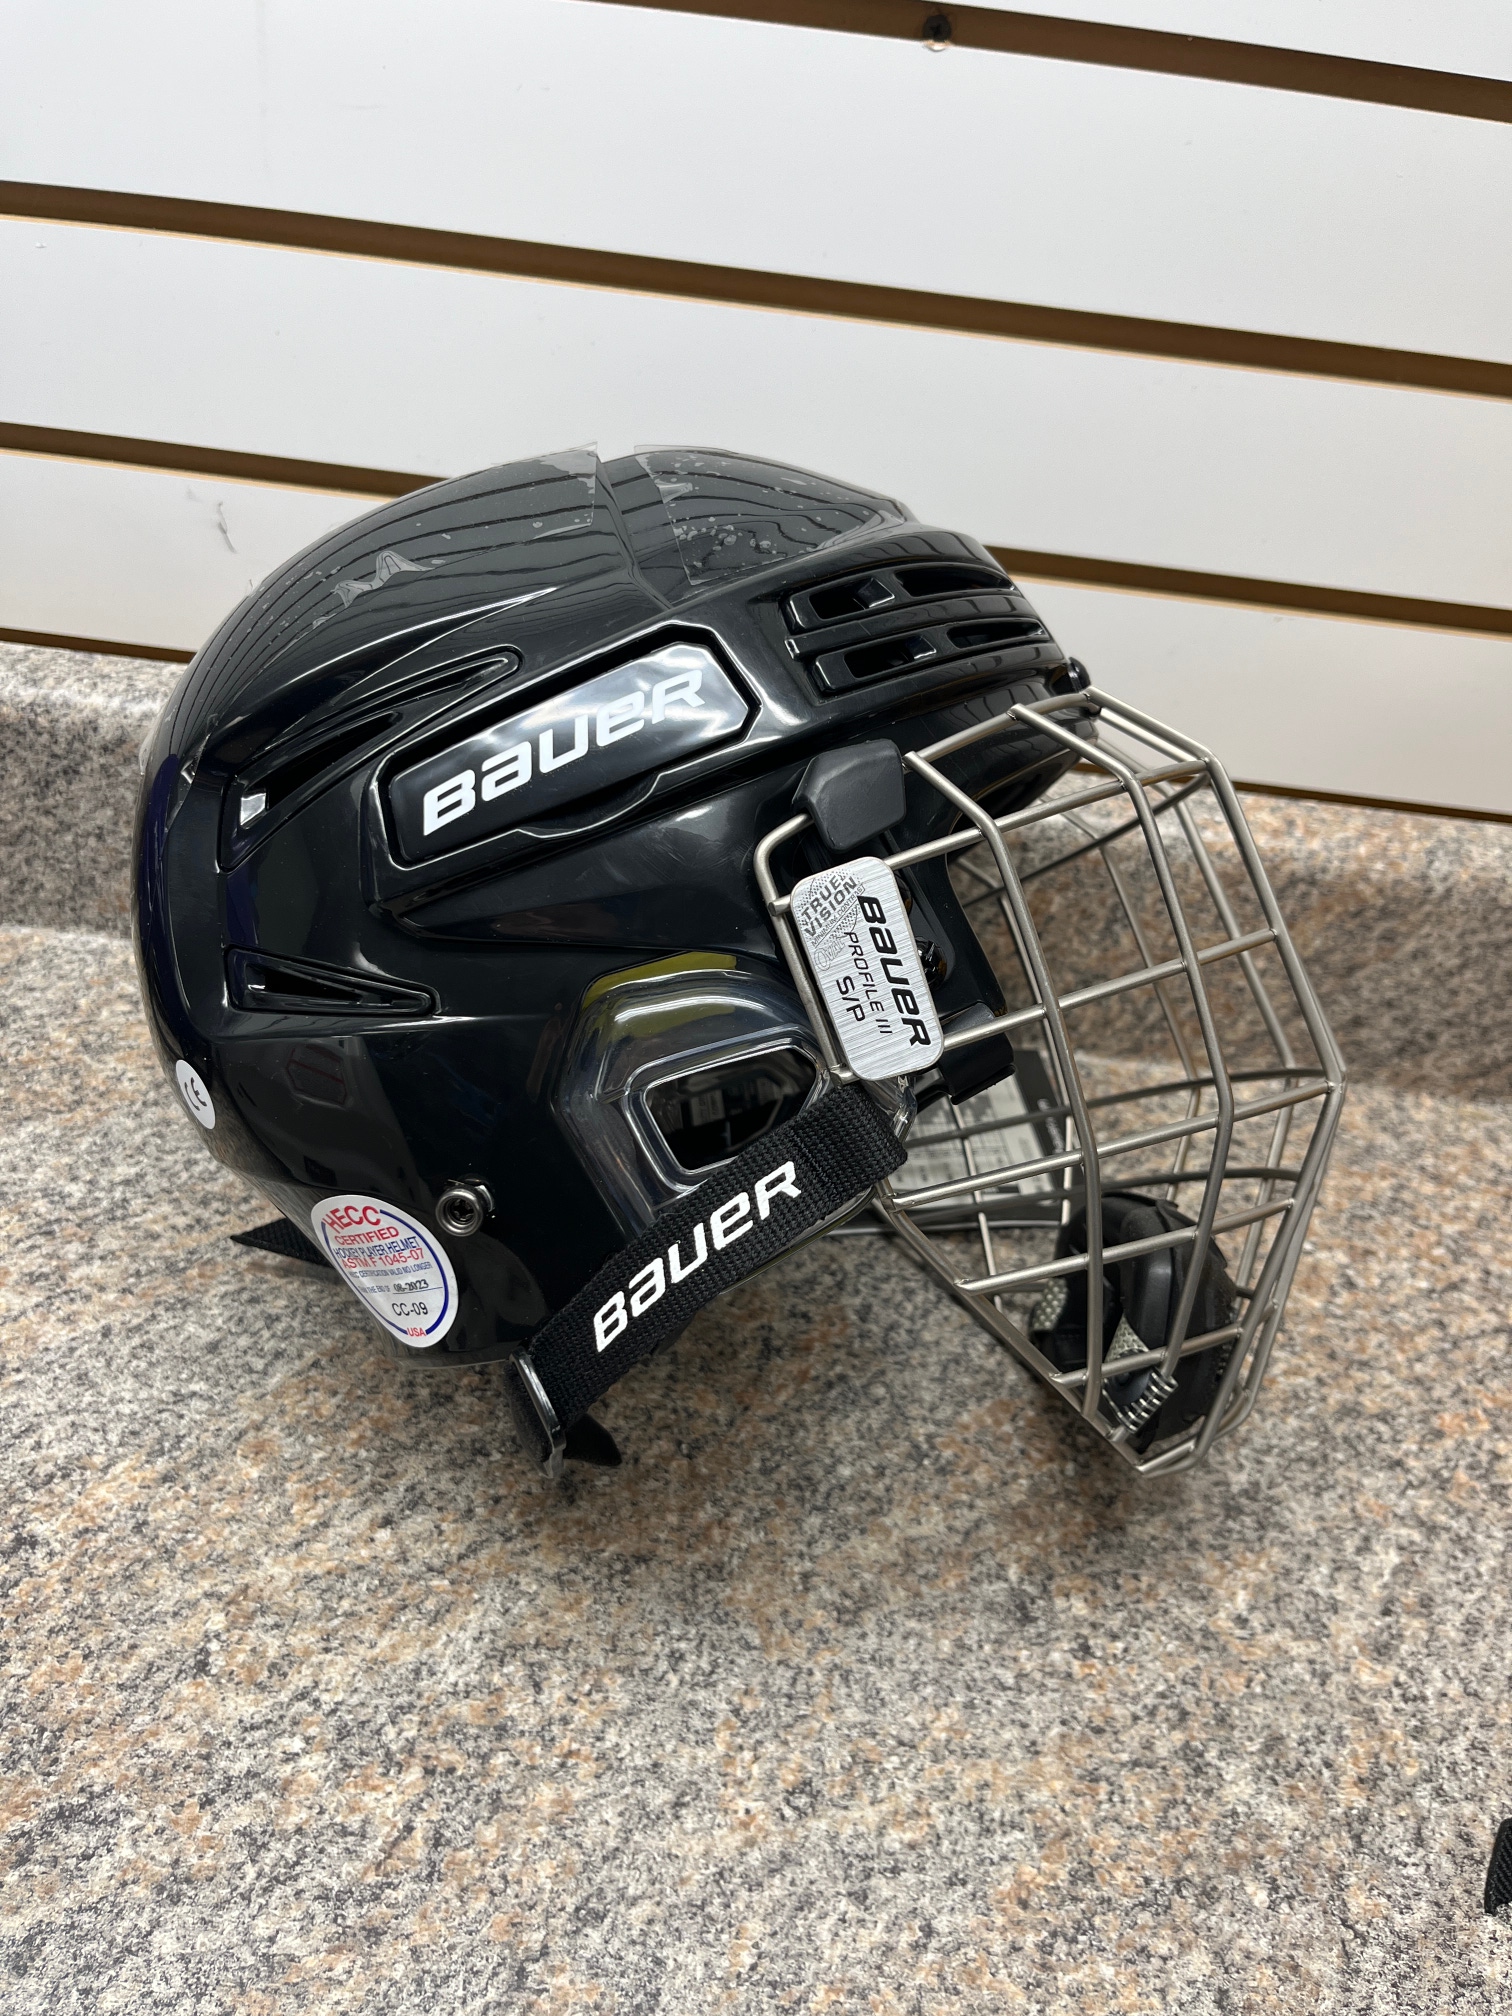 Small Bauer Re-Akt 75 Helmet with Cage